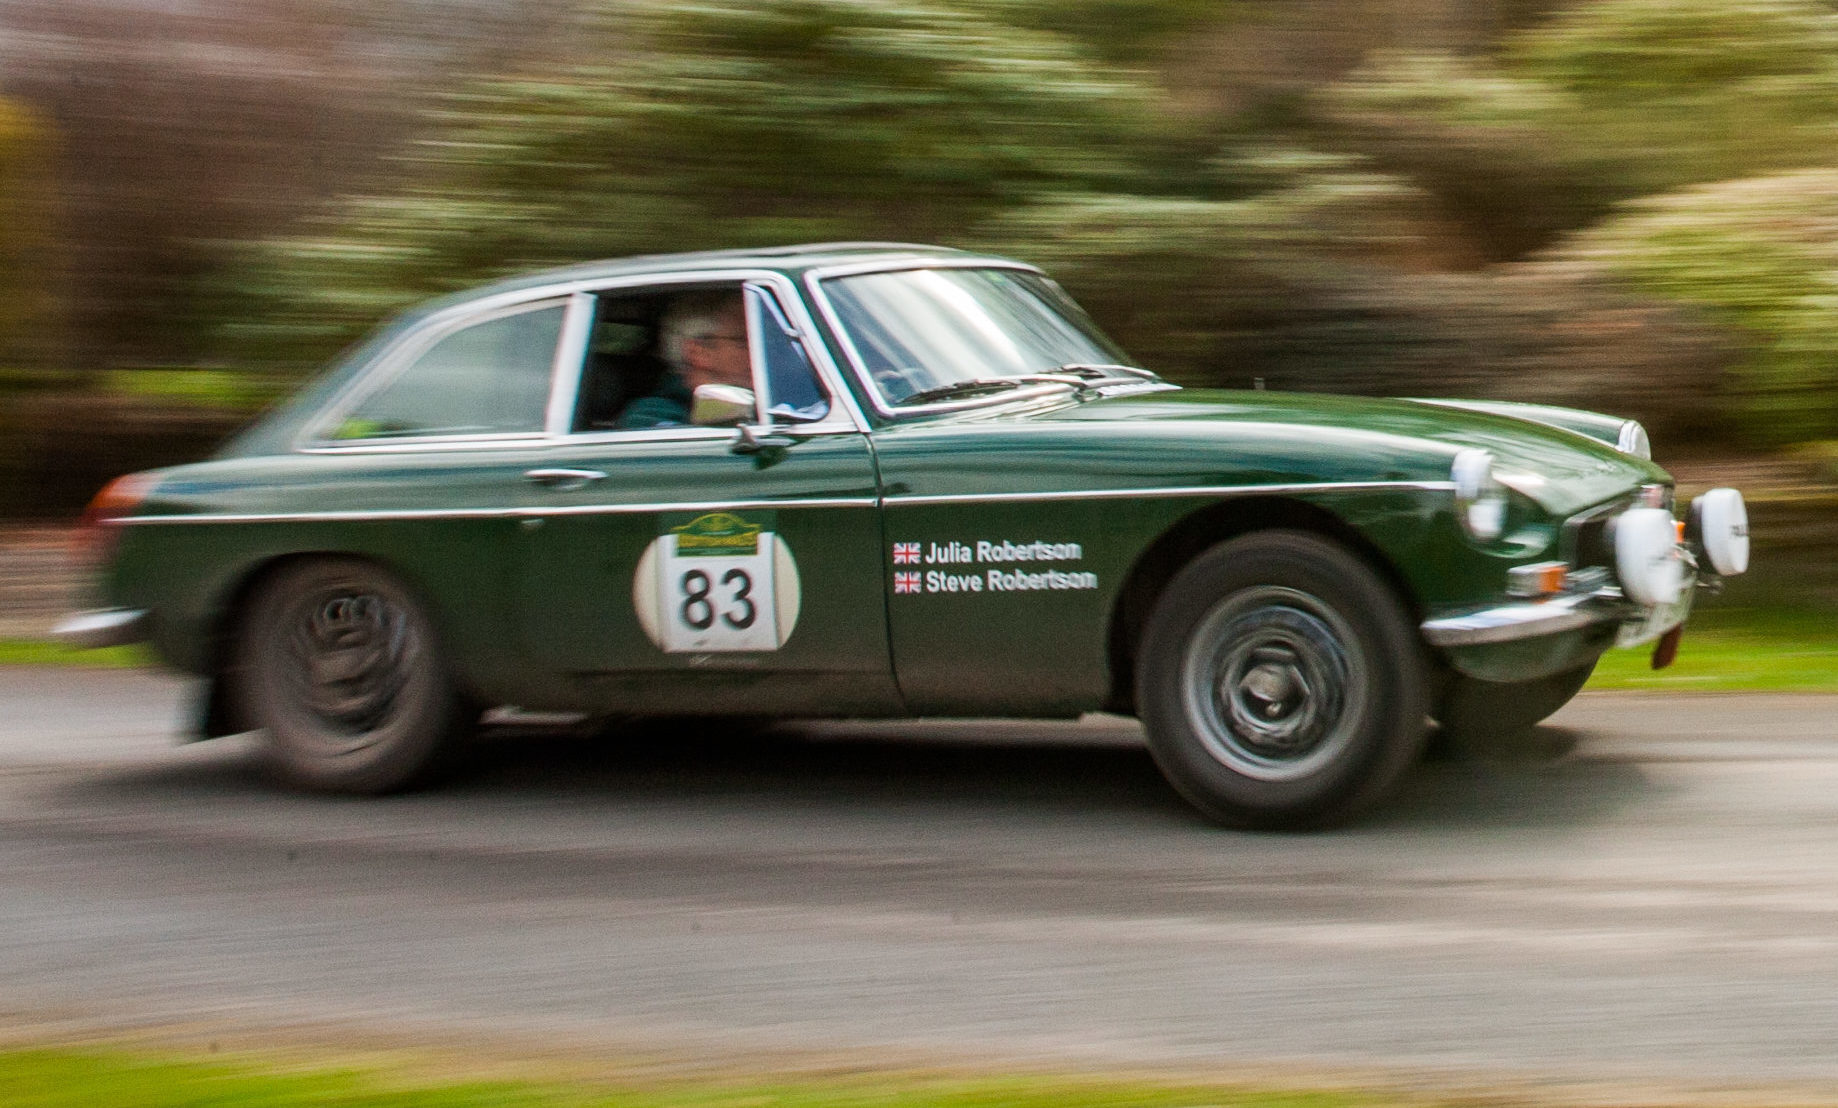 Julia and Steve Robertson set off in their MG B GT.